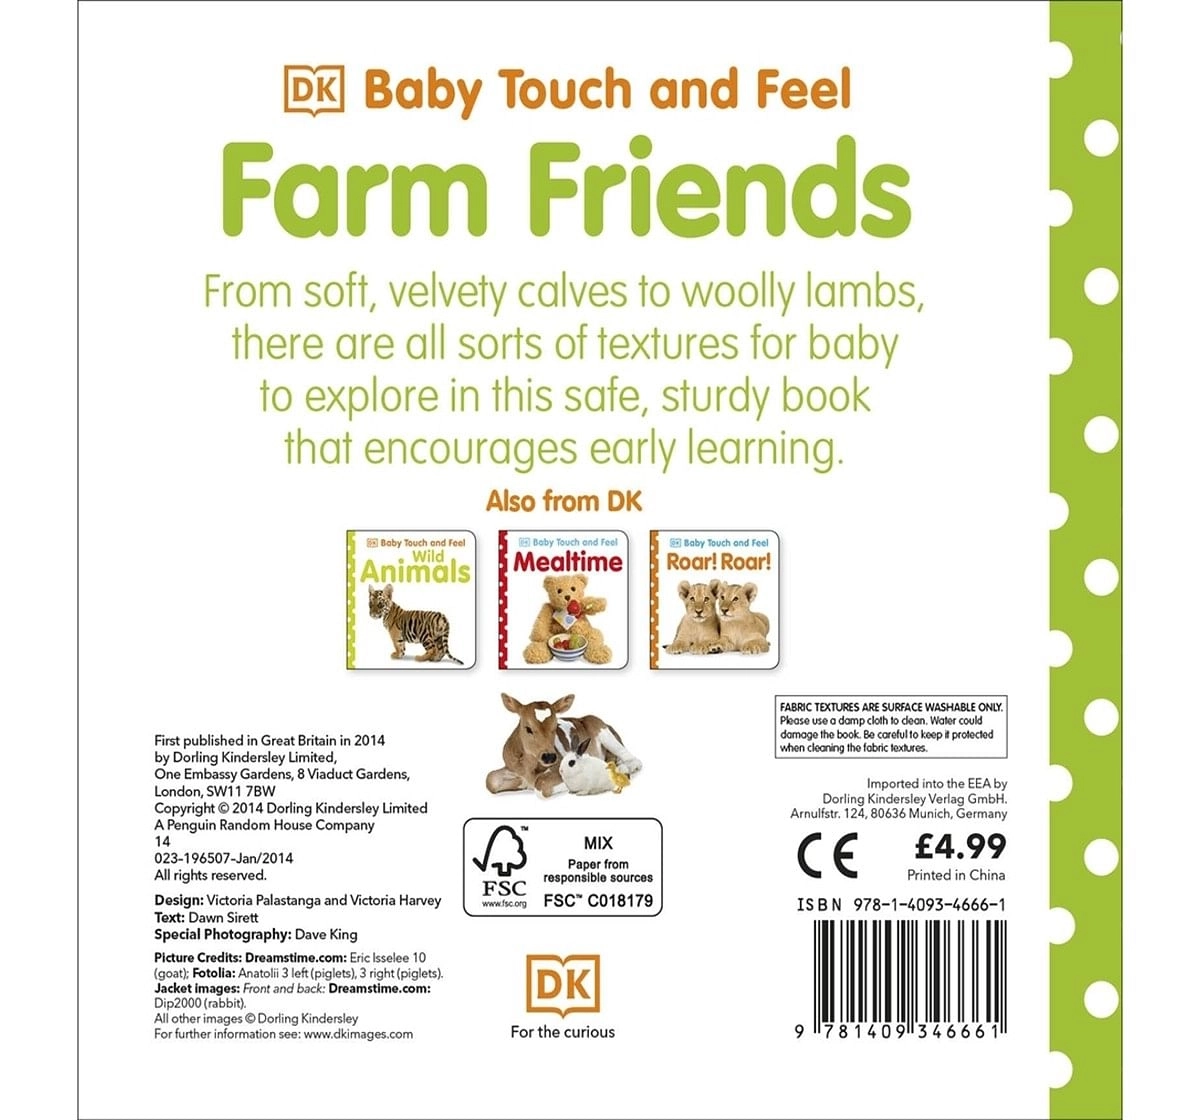 Baby Touch & Feel Farm Friends, 208 Pages Book by DK Children, Hardback